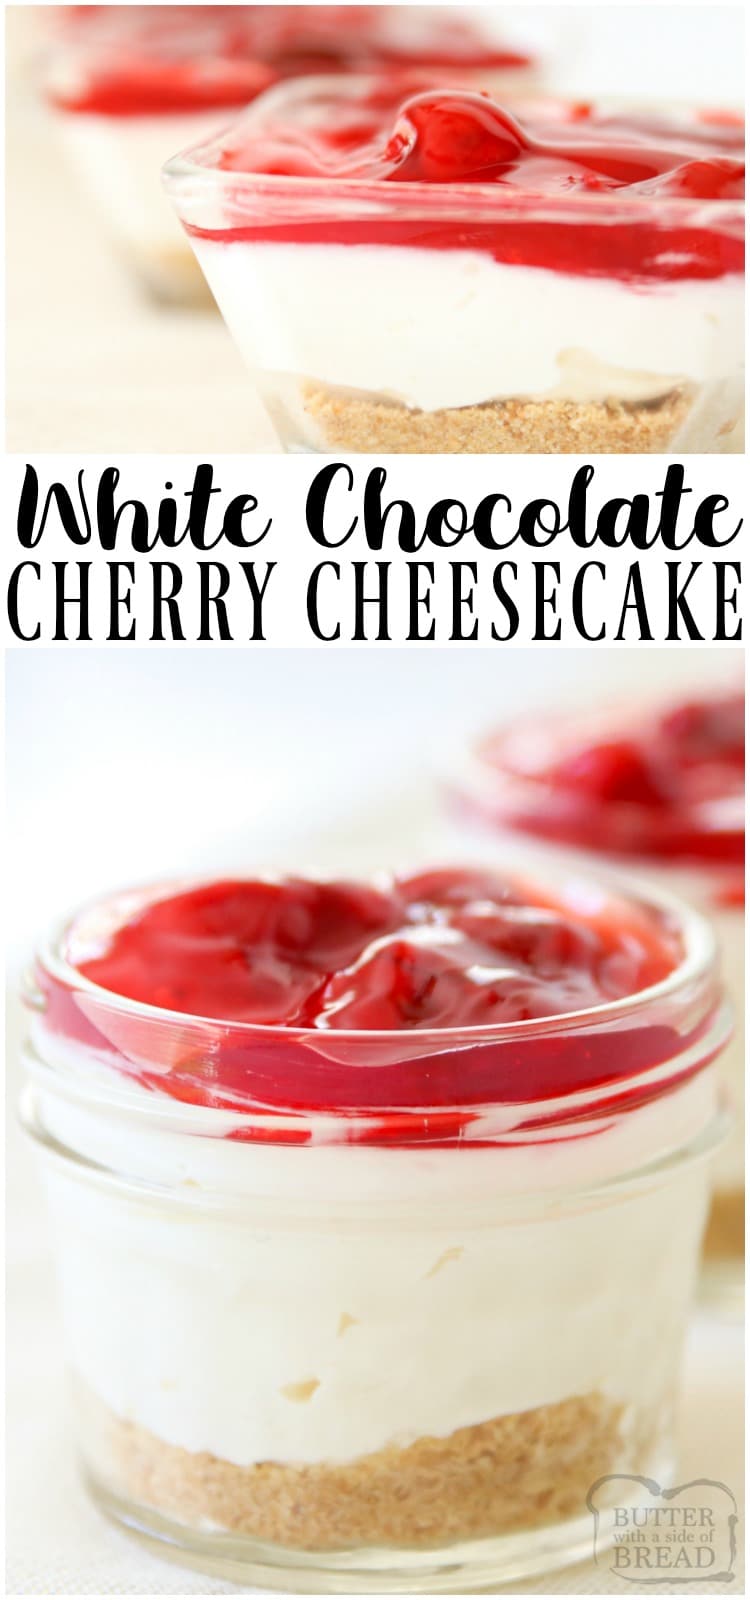 White Chocolate Cherry Cheesecakes are sweet & creamy no-bake cheesecakes topped with tangy cherry pie filling. Simple, easy to make cheesecake desserts perfect for entertaining!